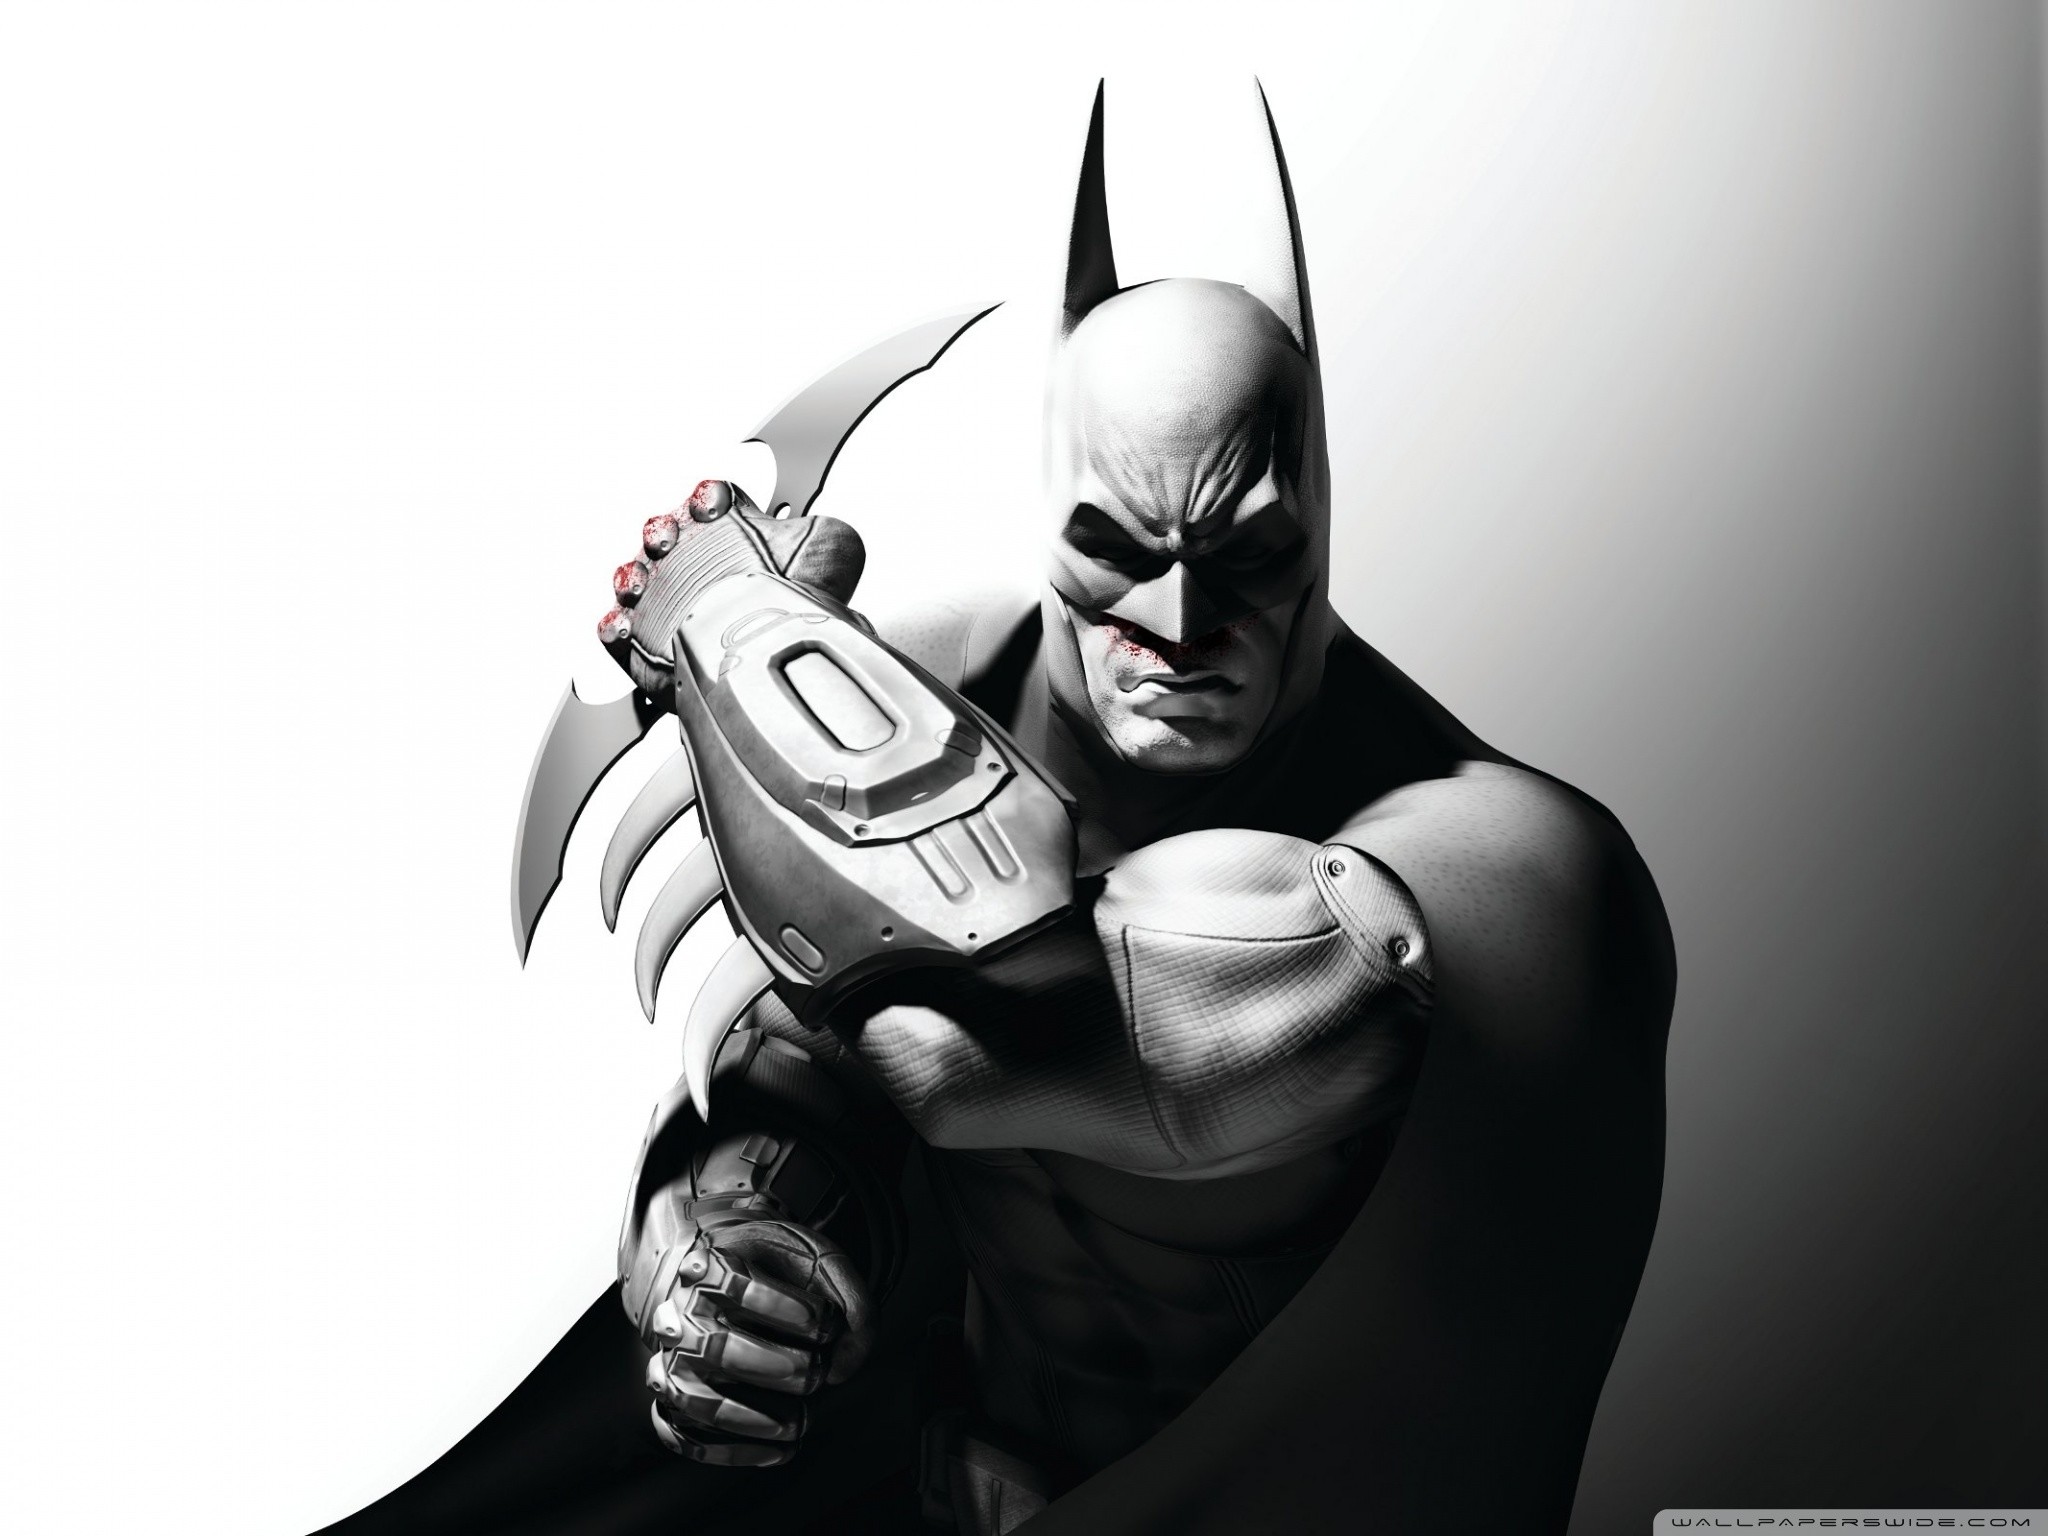 190+ Batman: Arkham City HD Wallpapers and Backgrounds